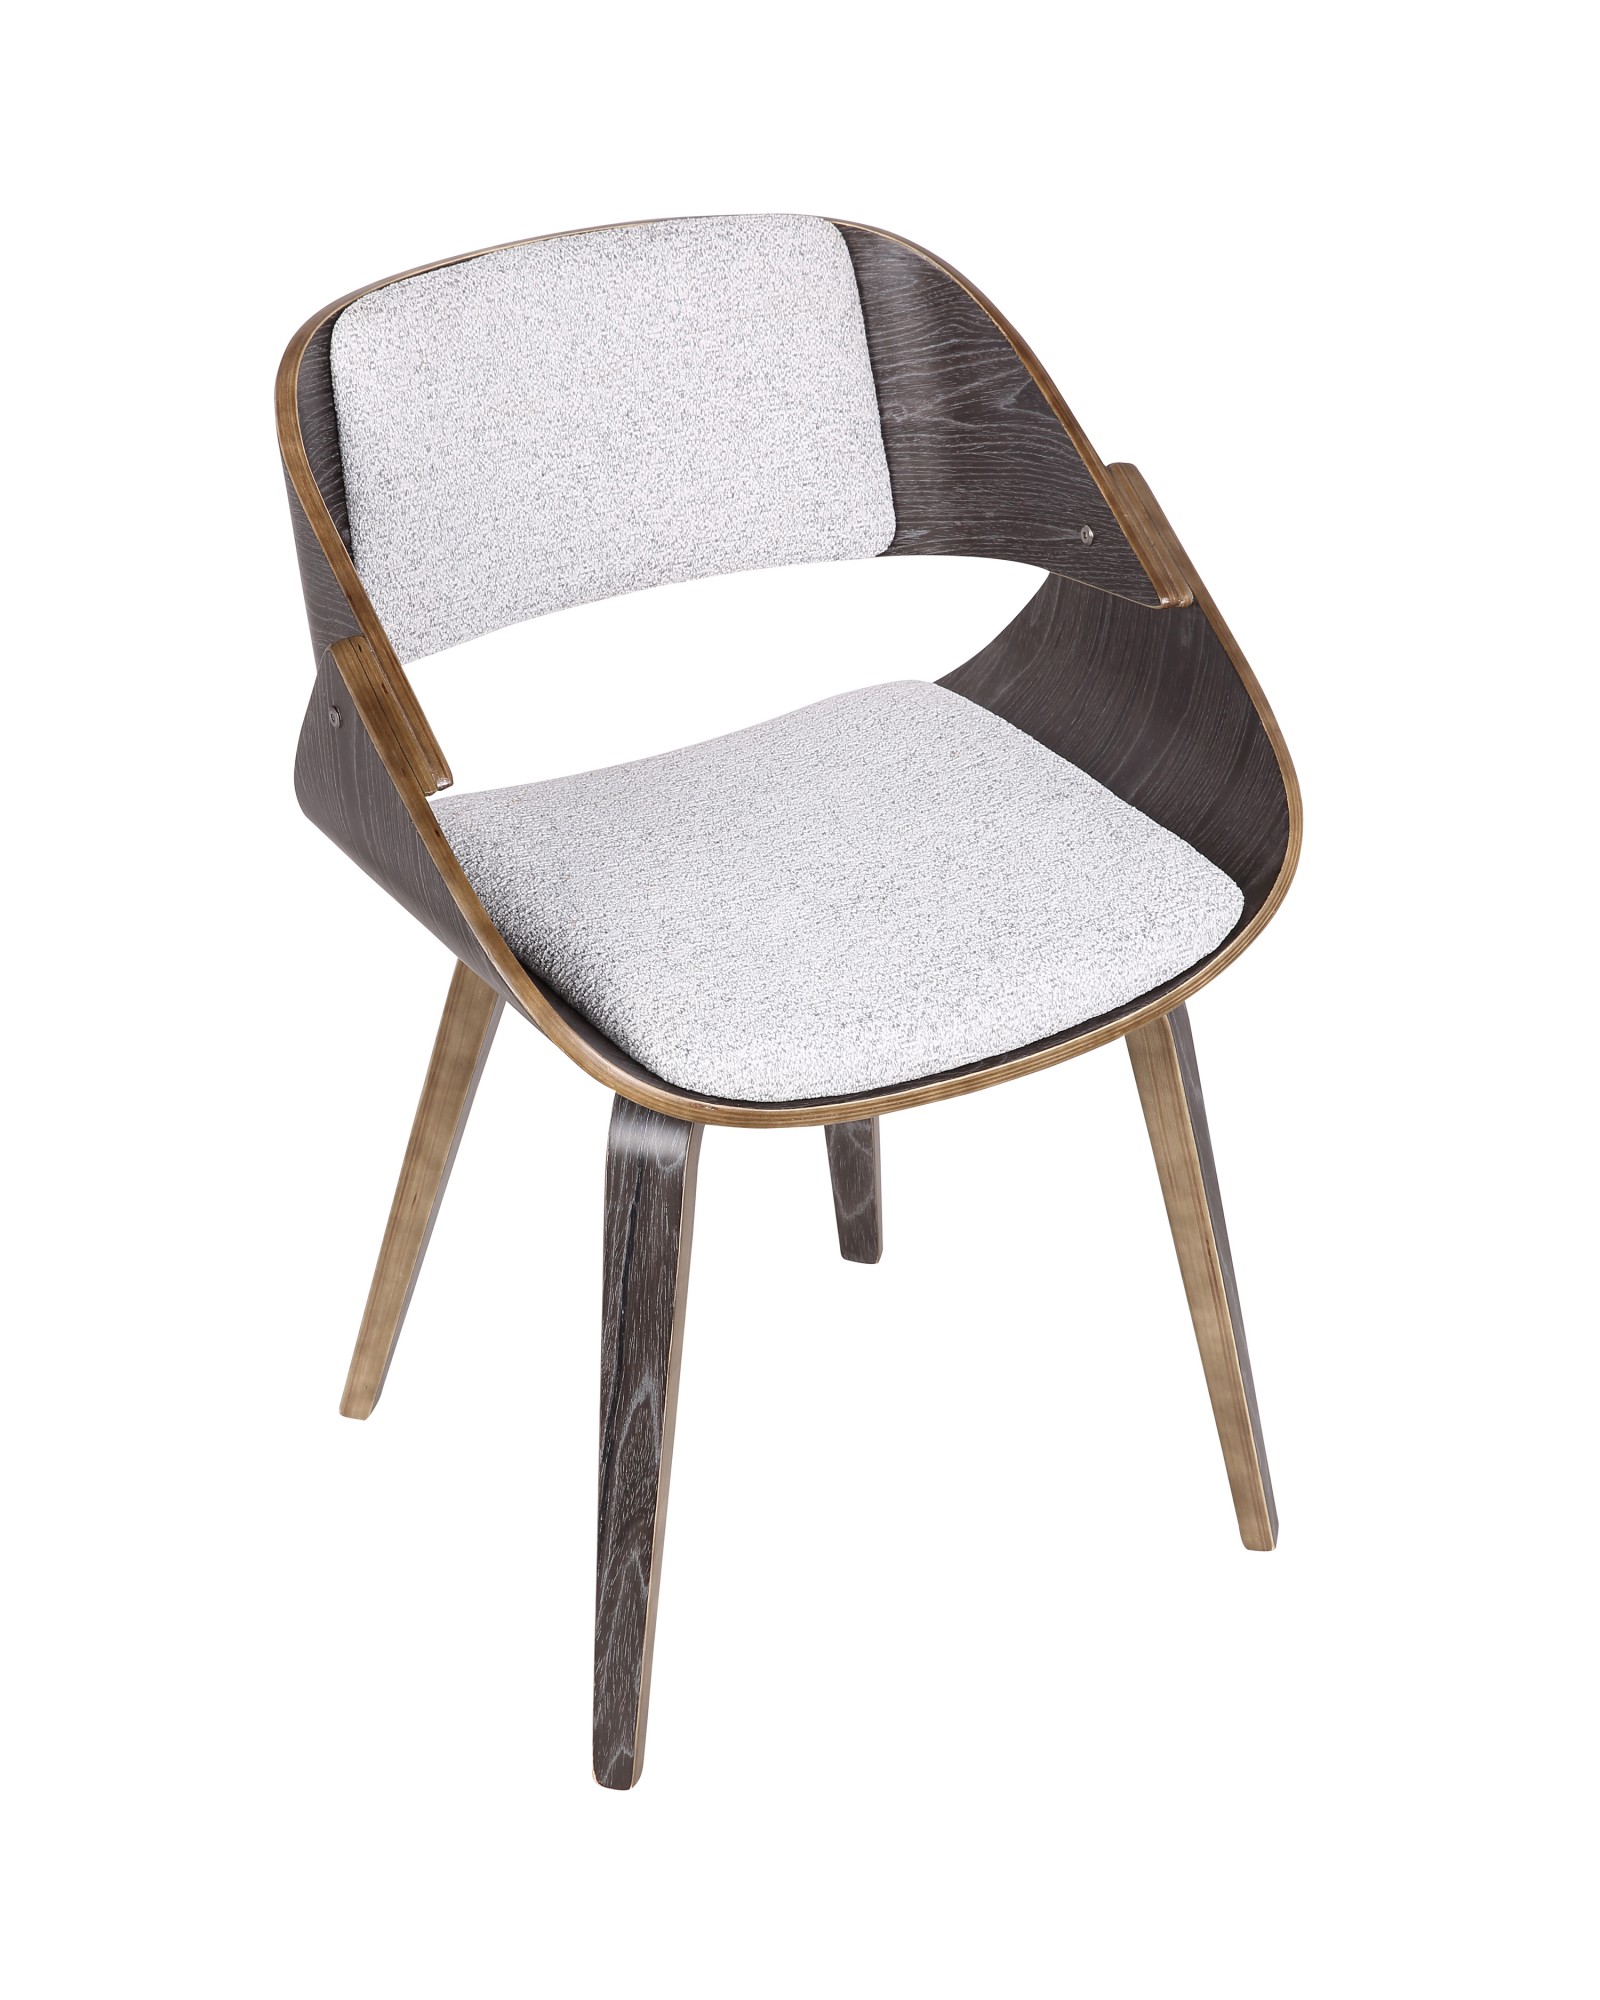 Fortunato Mid-Century Modern Dining/Accent Chair in Dark Grey Wood with White Fabric